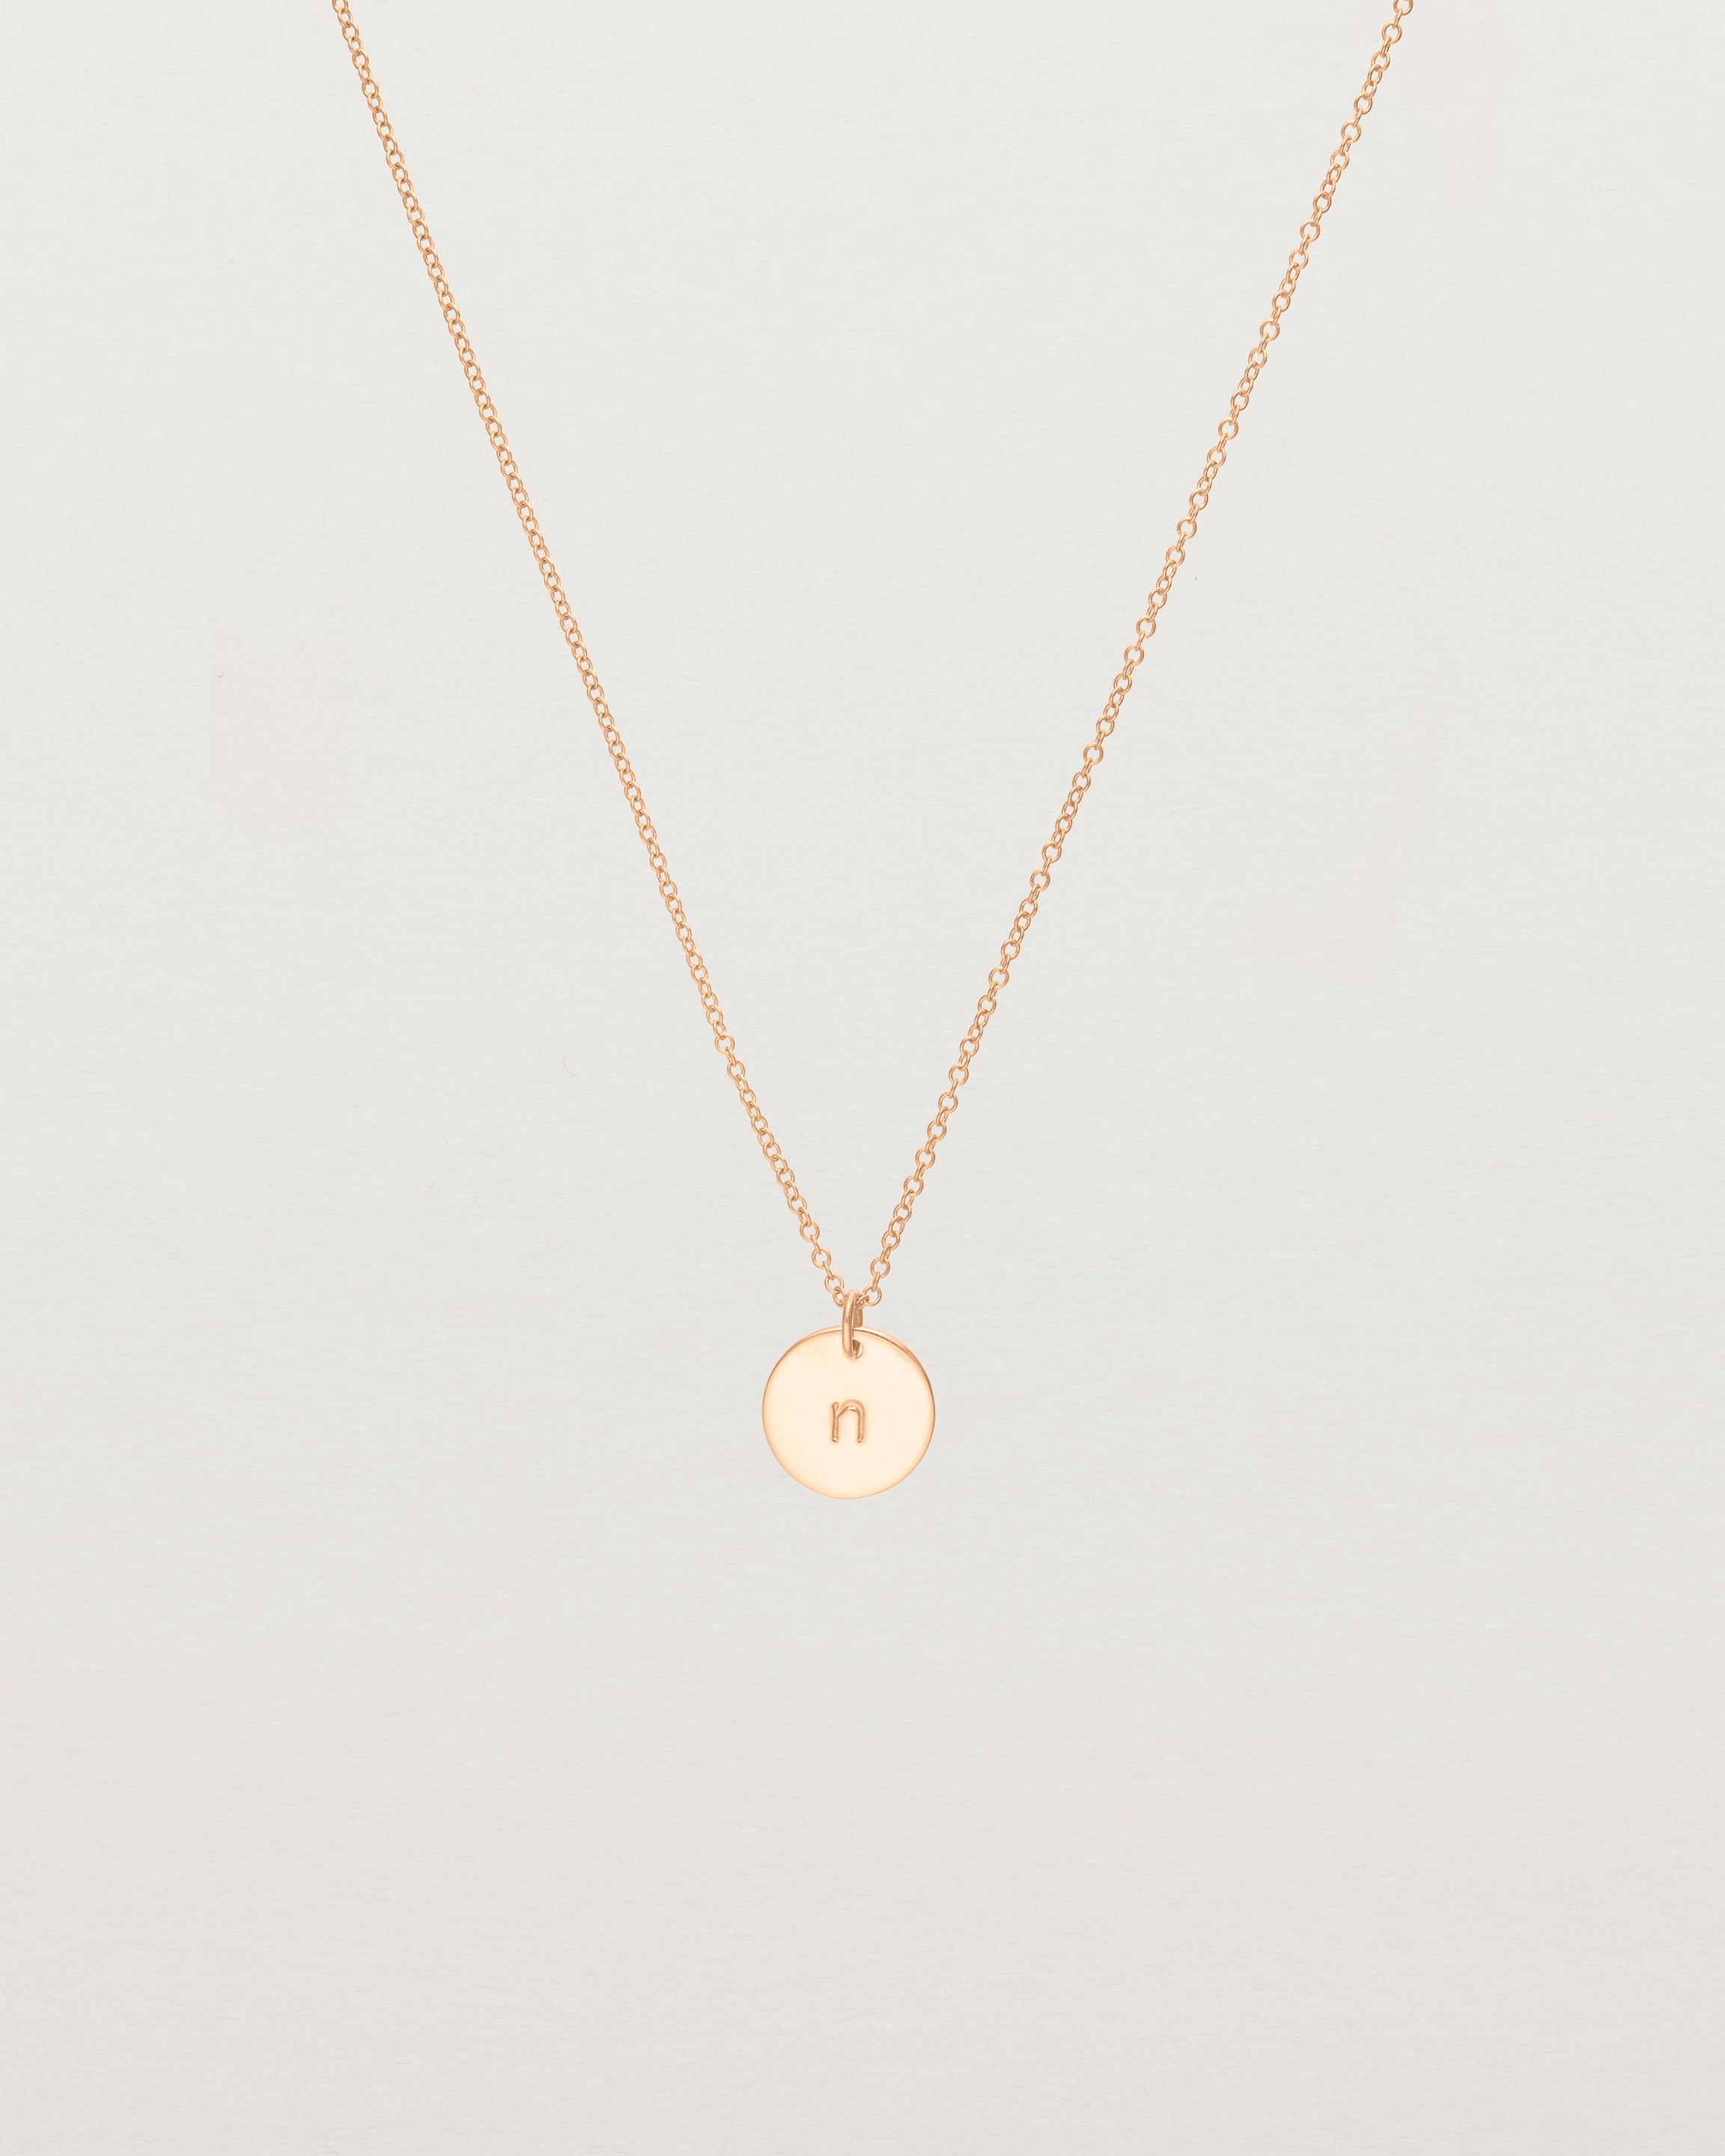 Front view of the Mini Initial Necklace in Rose Gold.